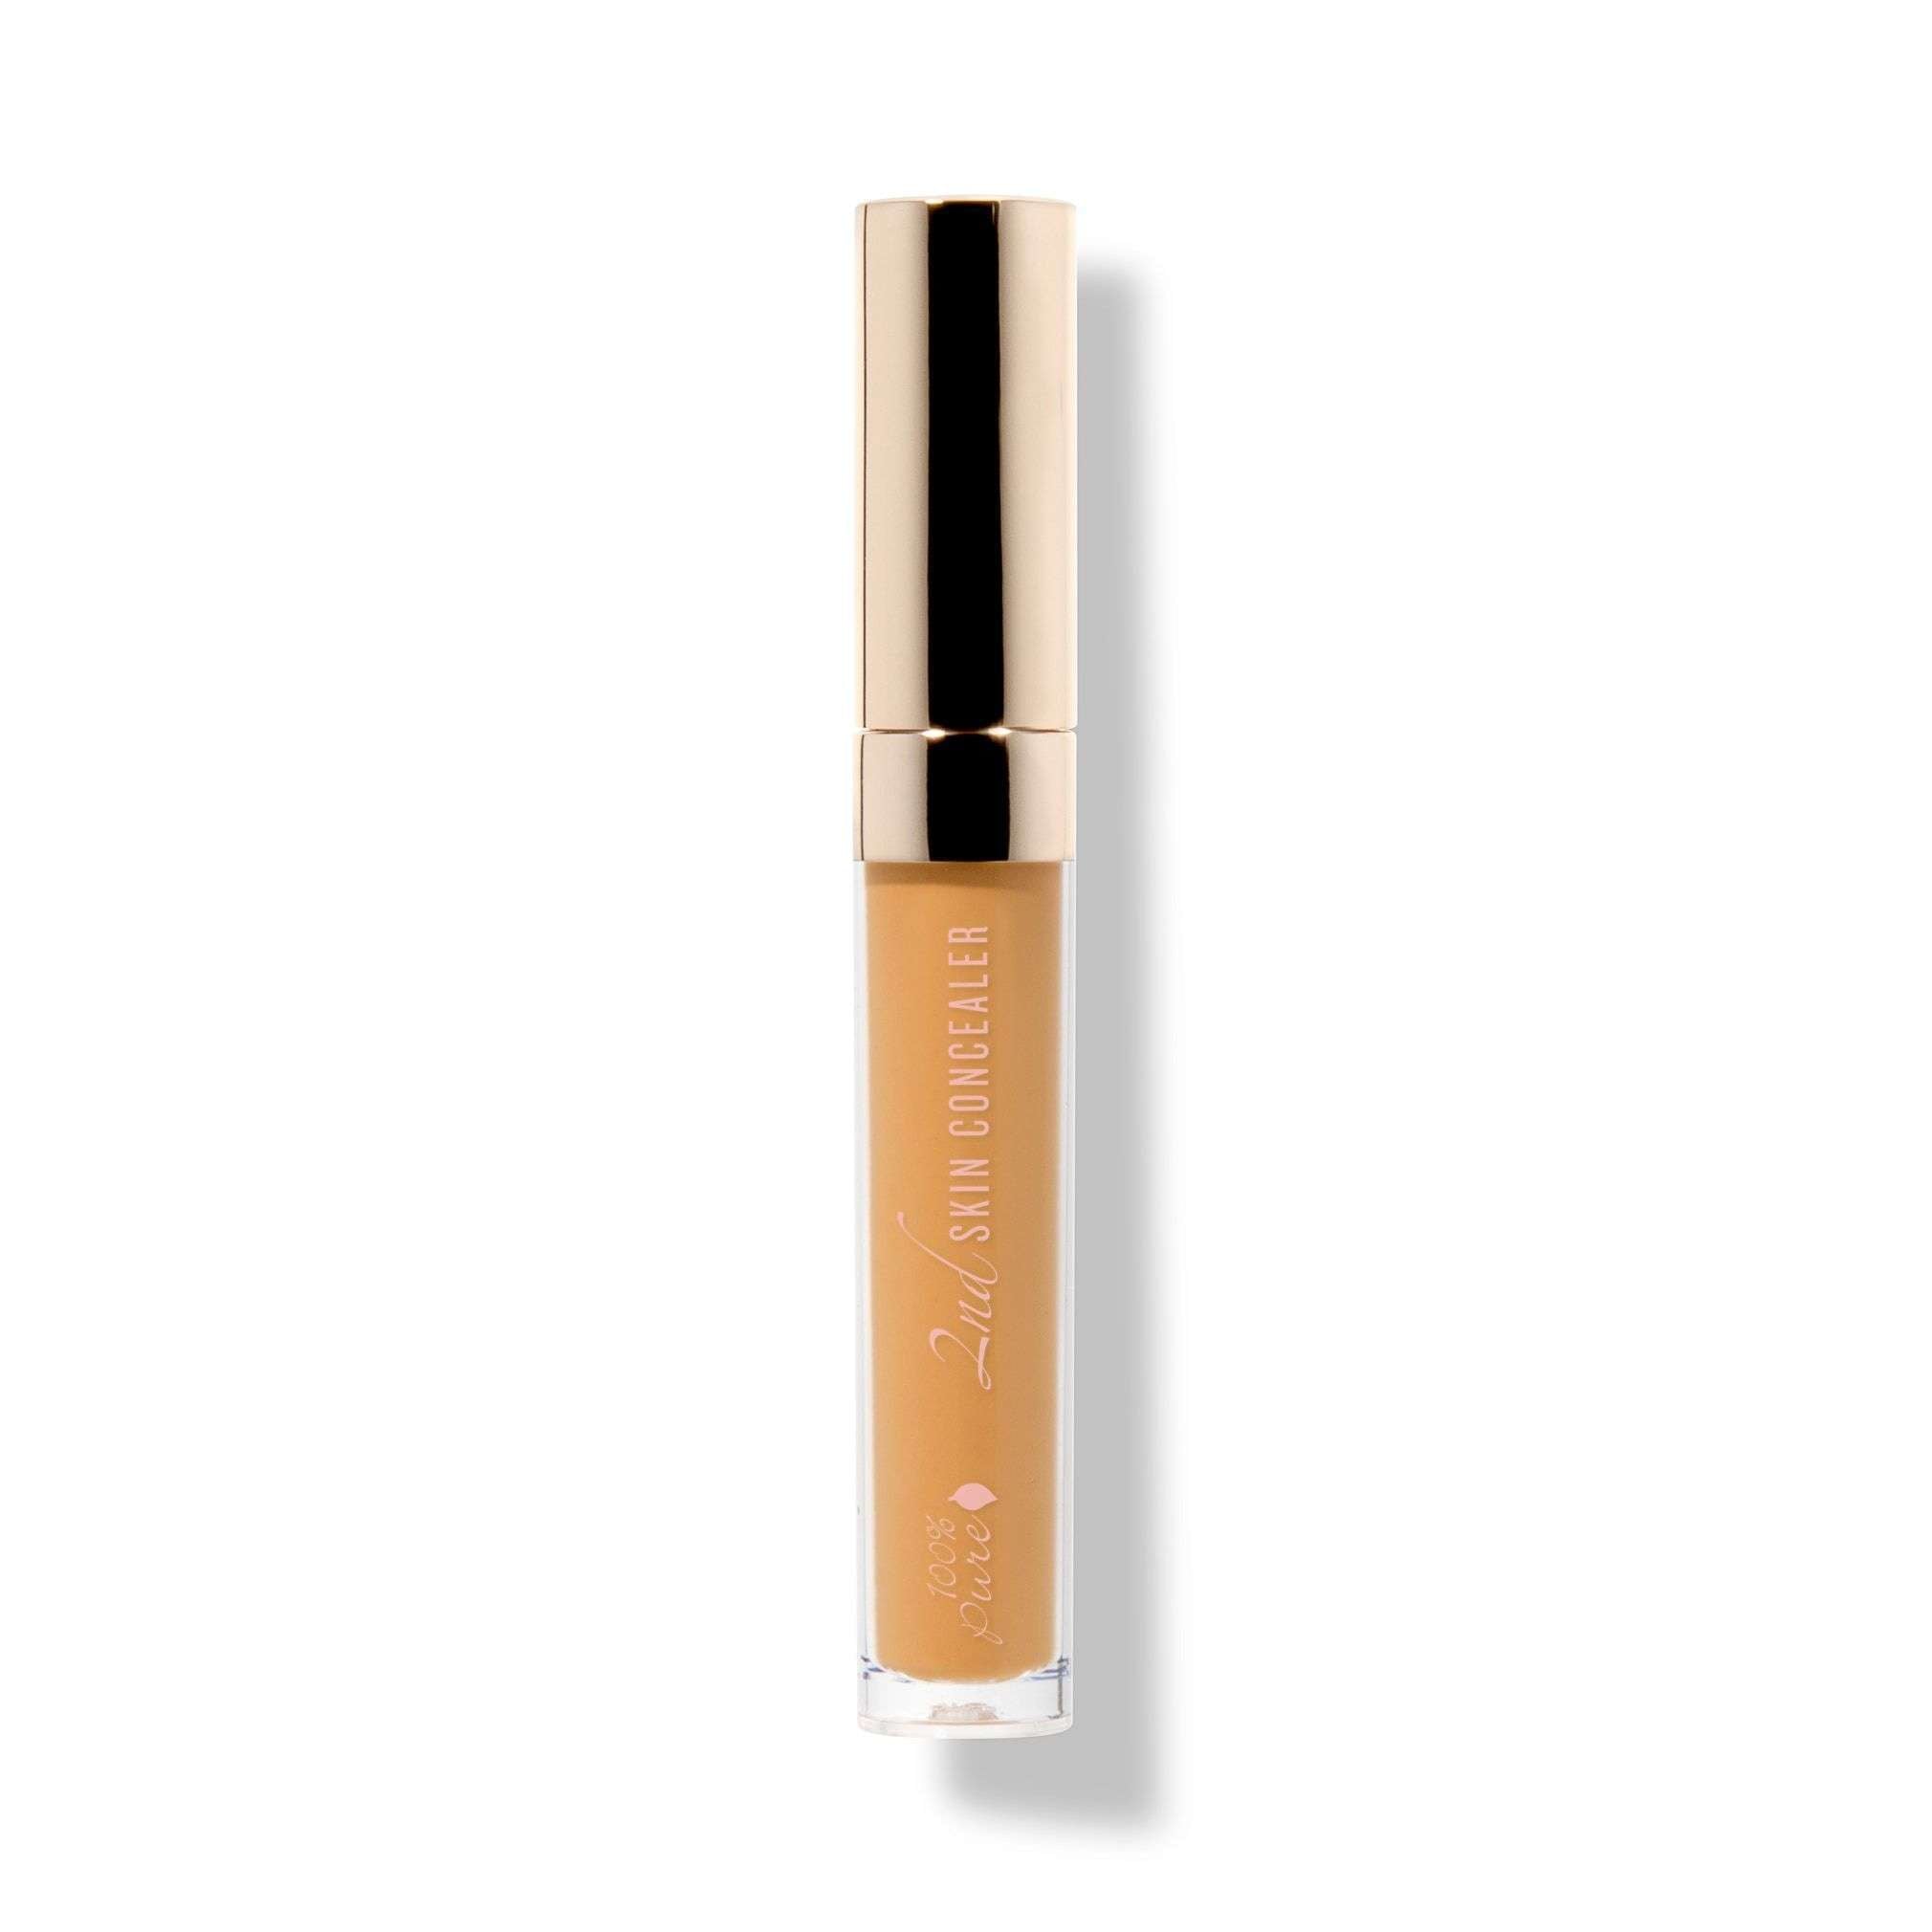 100% Pure® Fruit Pigmented® 2nd Skin Concealer, Shade 3